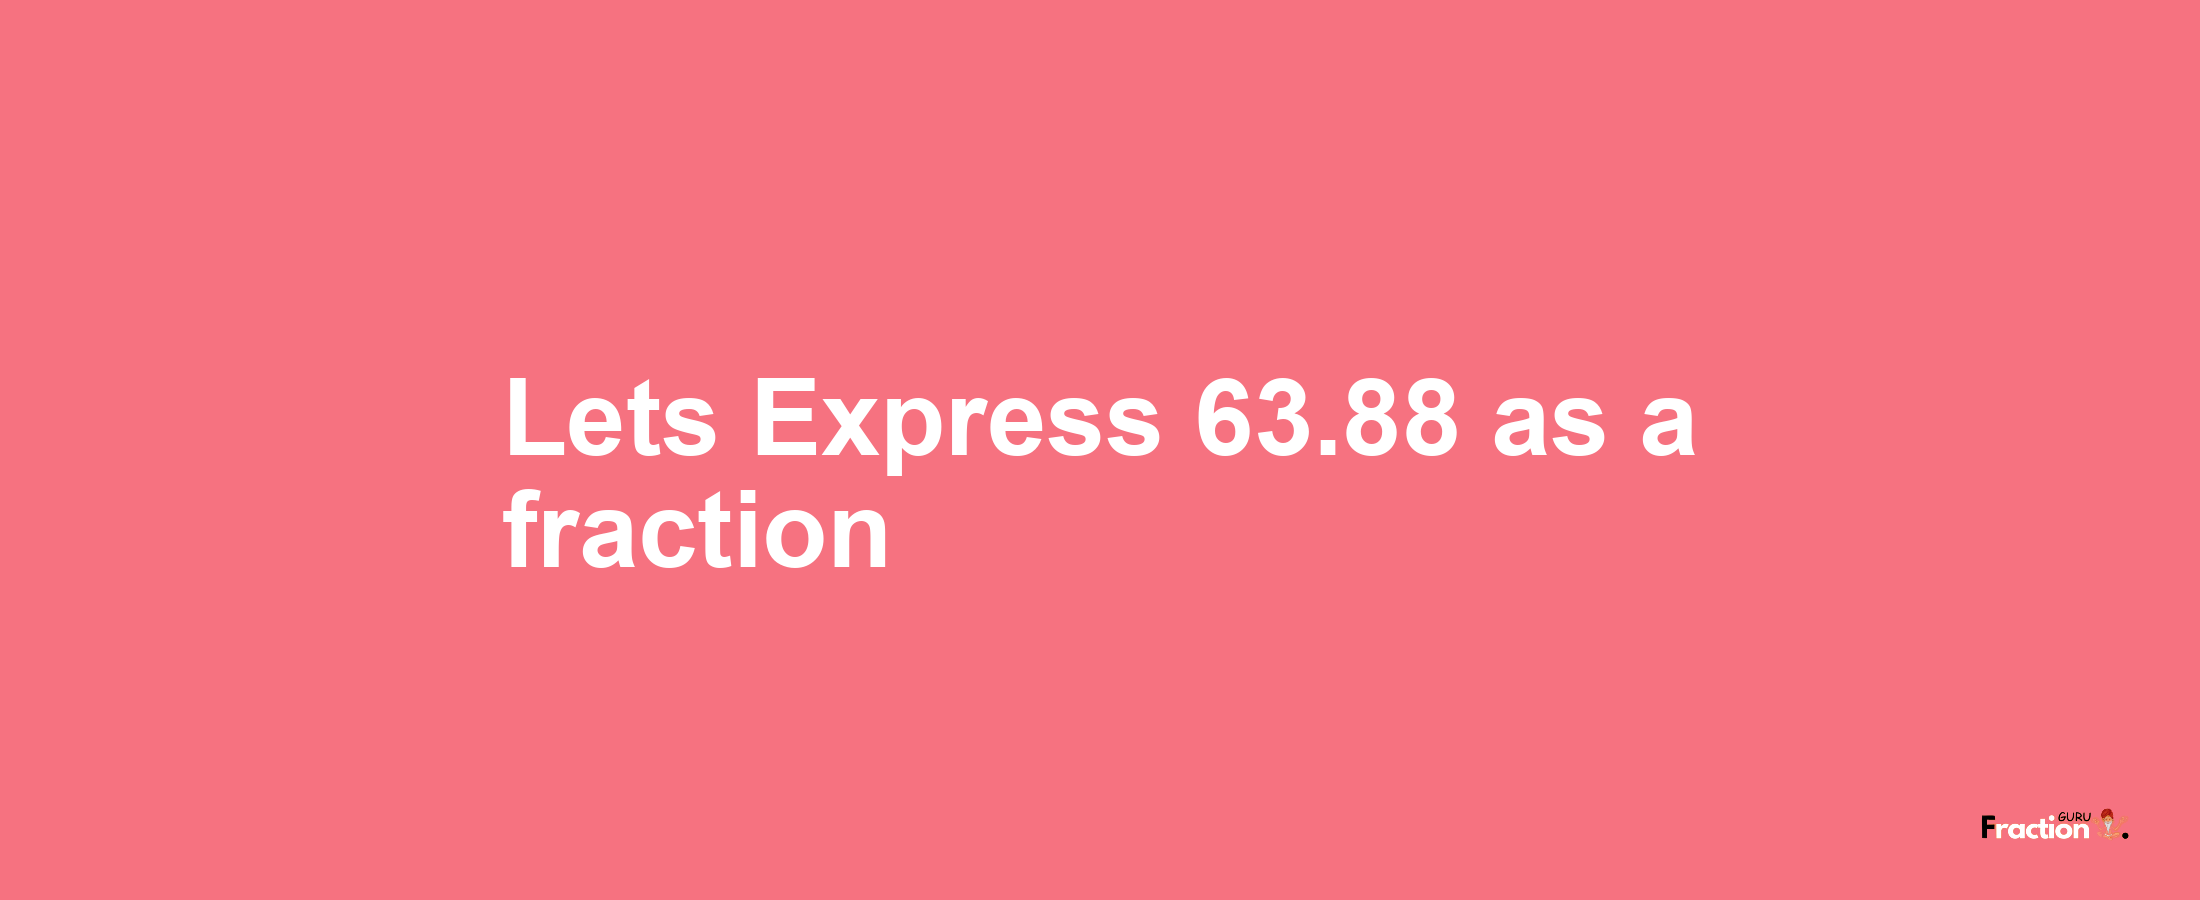 Lets Express 63.88 as afraction